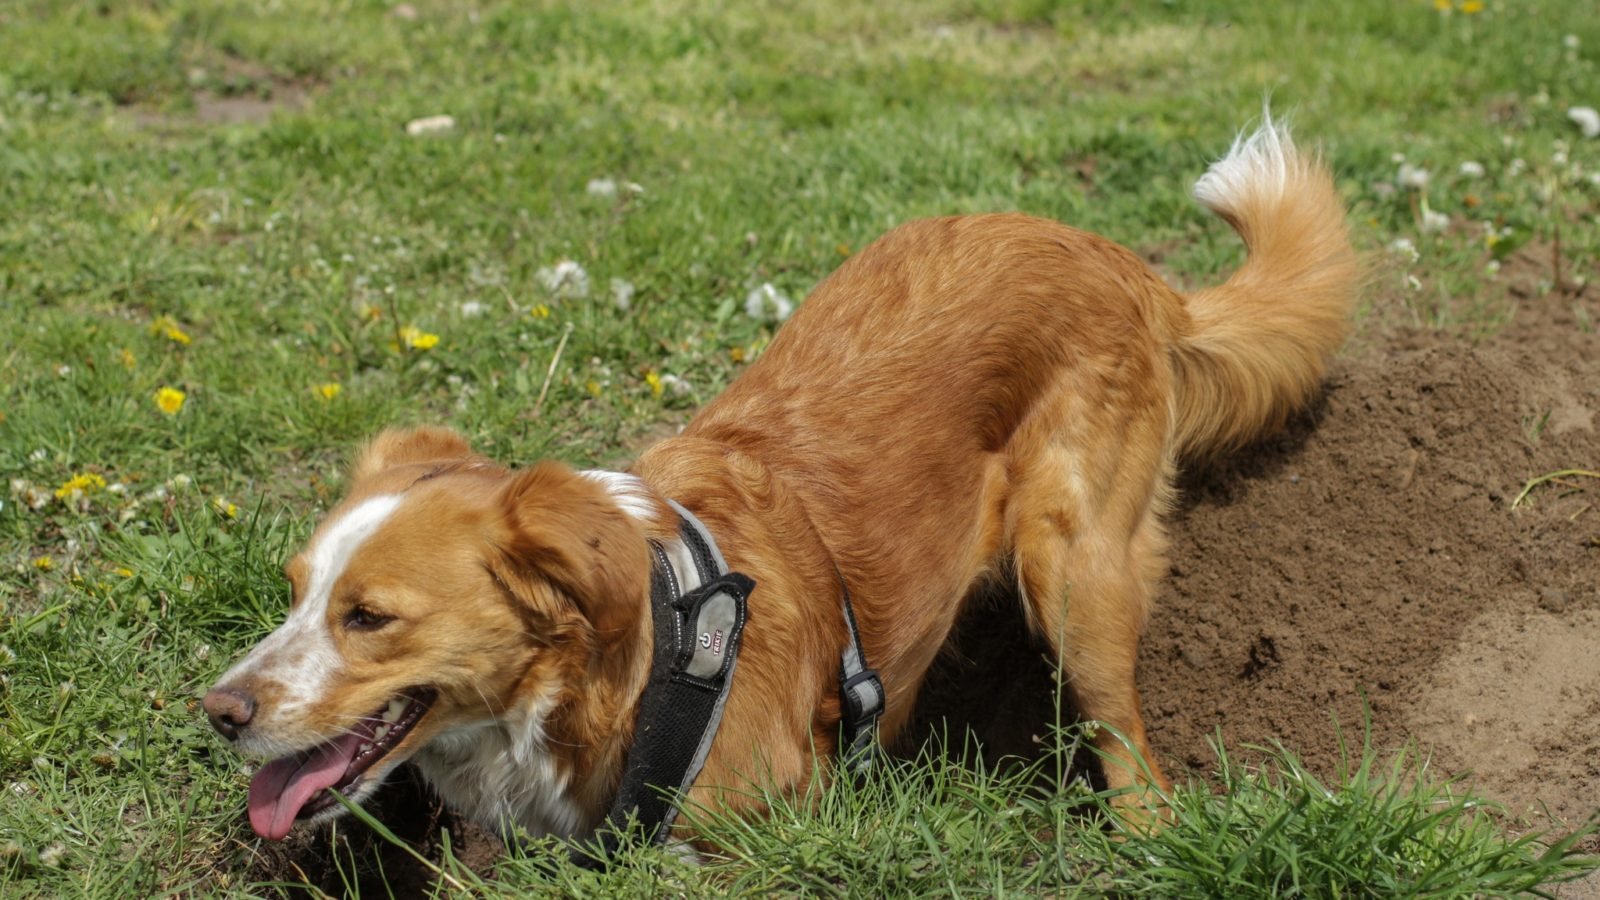 A dog digging out sand on a lawn